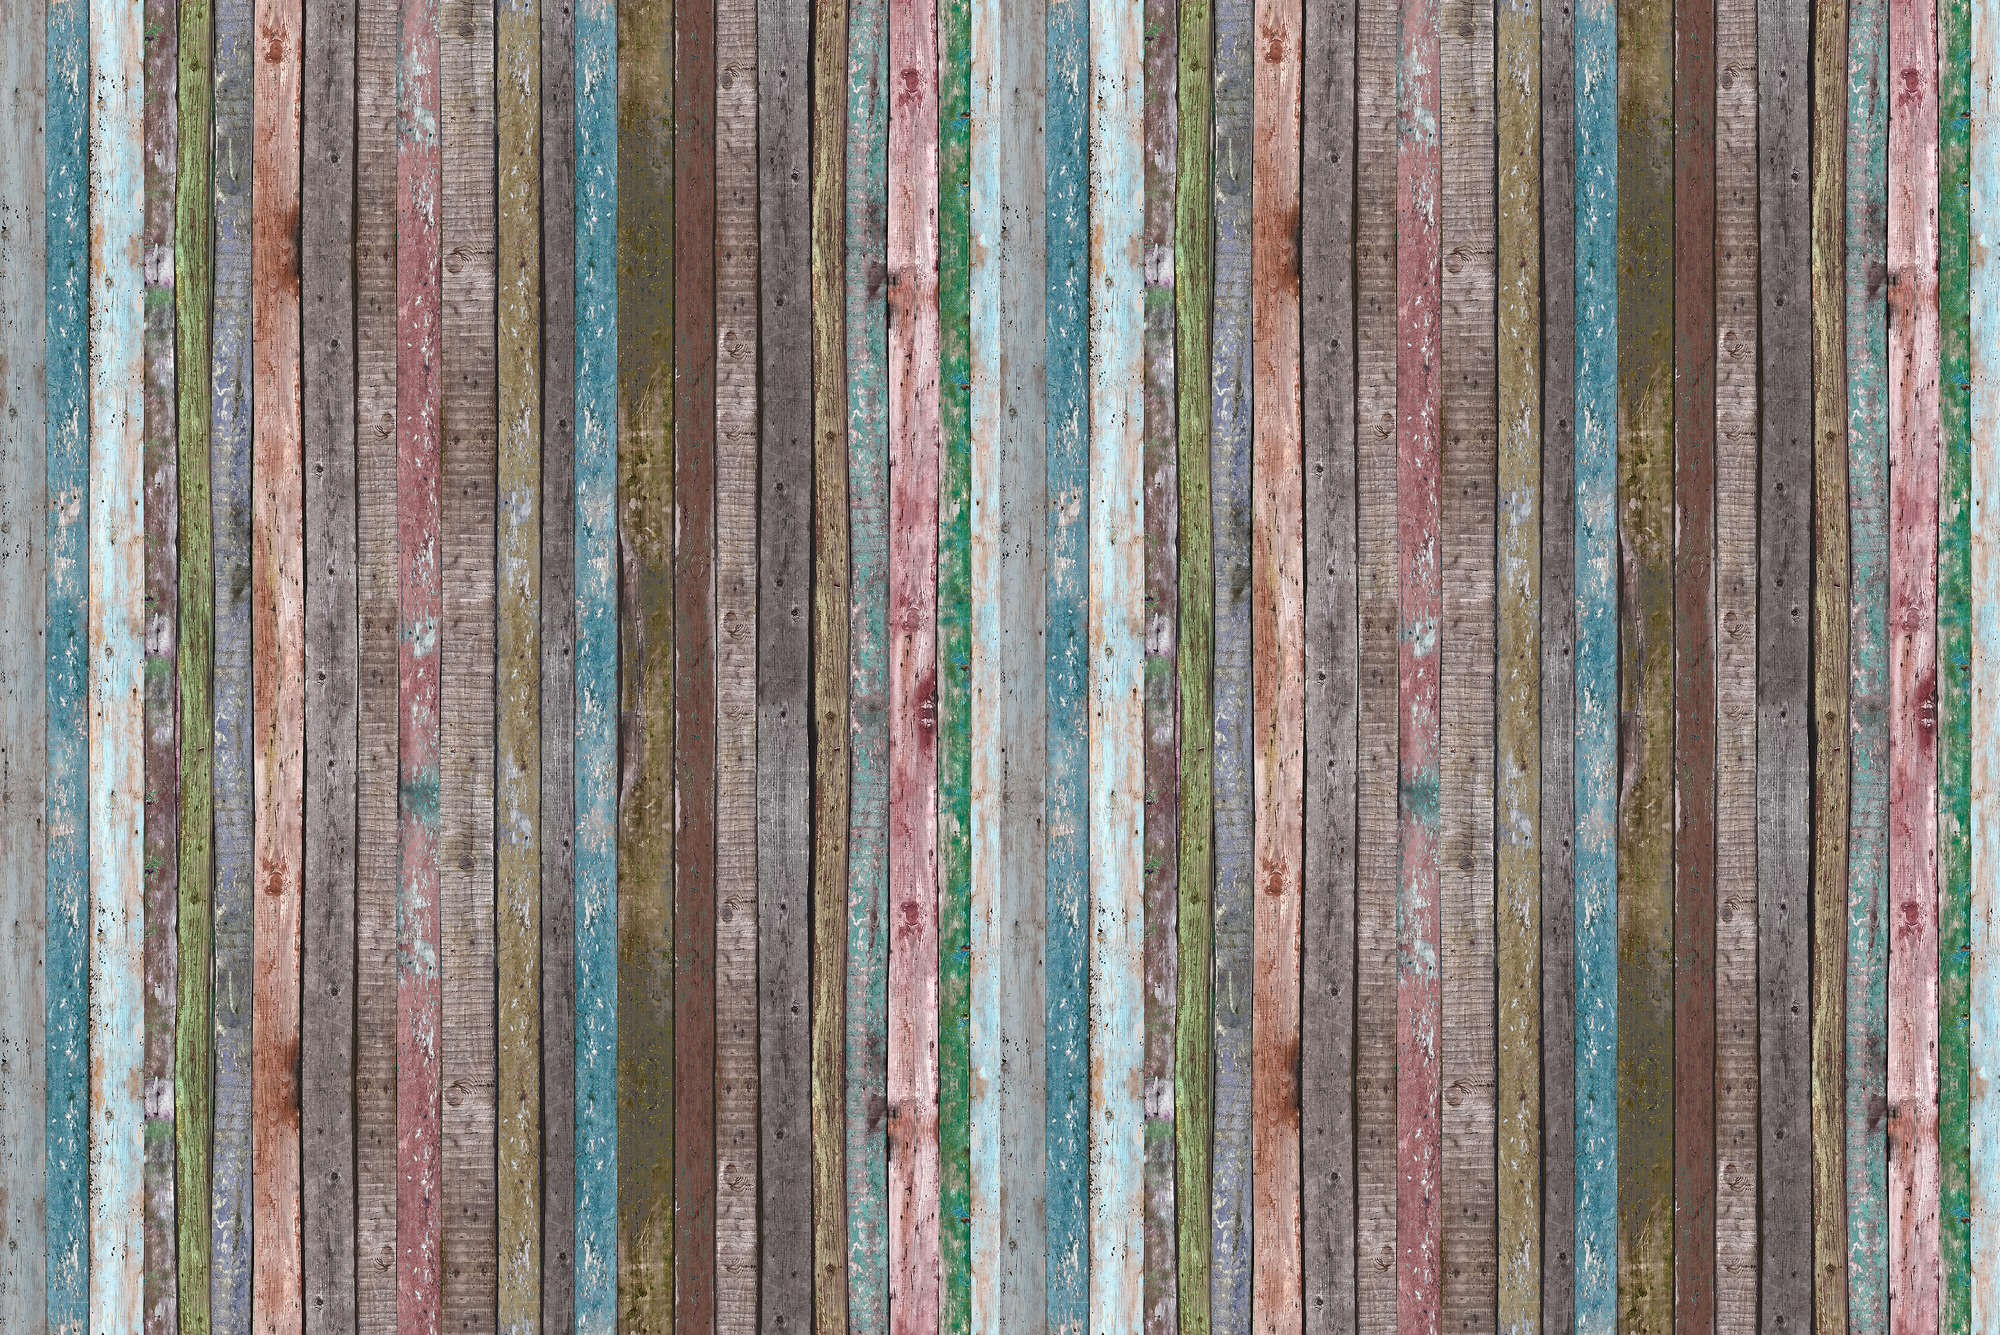             Wood photo wallpaper fence of boards brown turquoise on mother of pearl smooth fleece
        